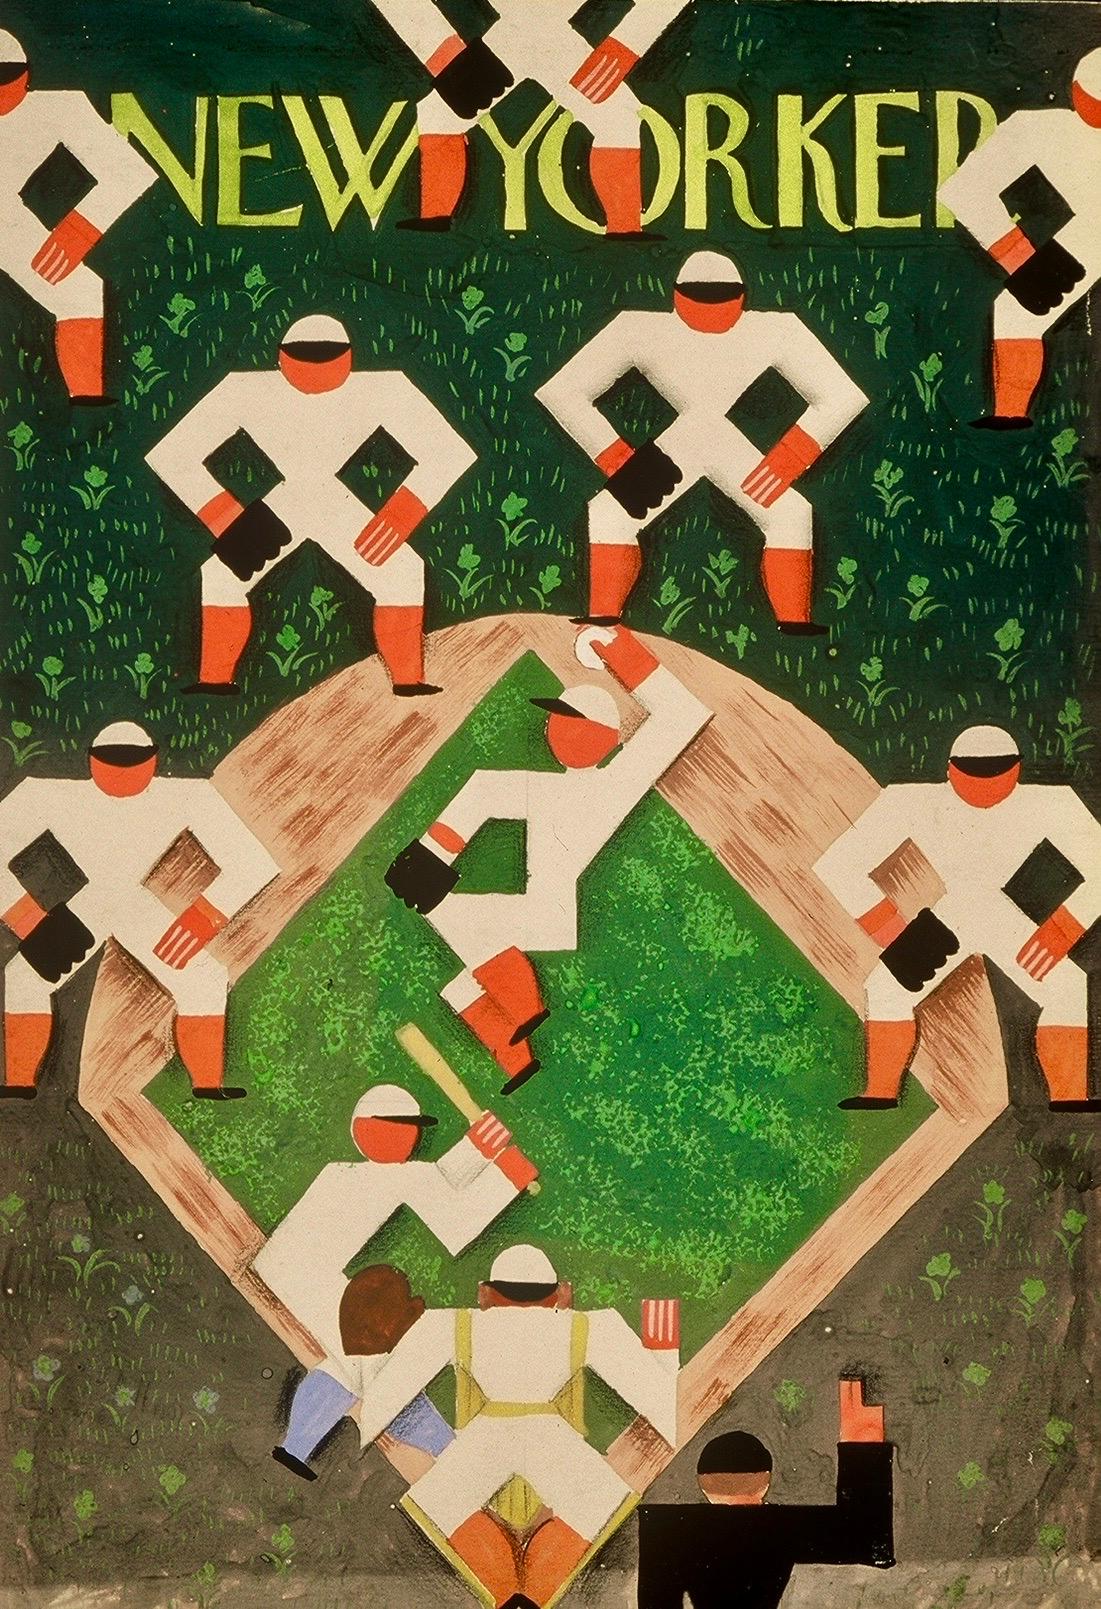 Original Painting. New Yorker Cover Proposal Baseball c. 1939 Modern Cubist Deco